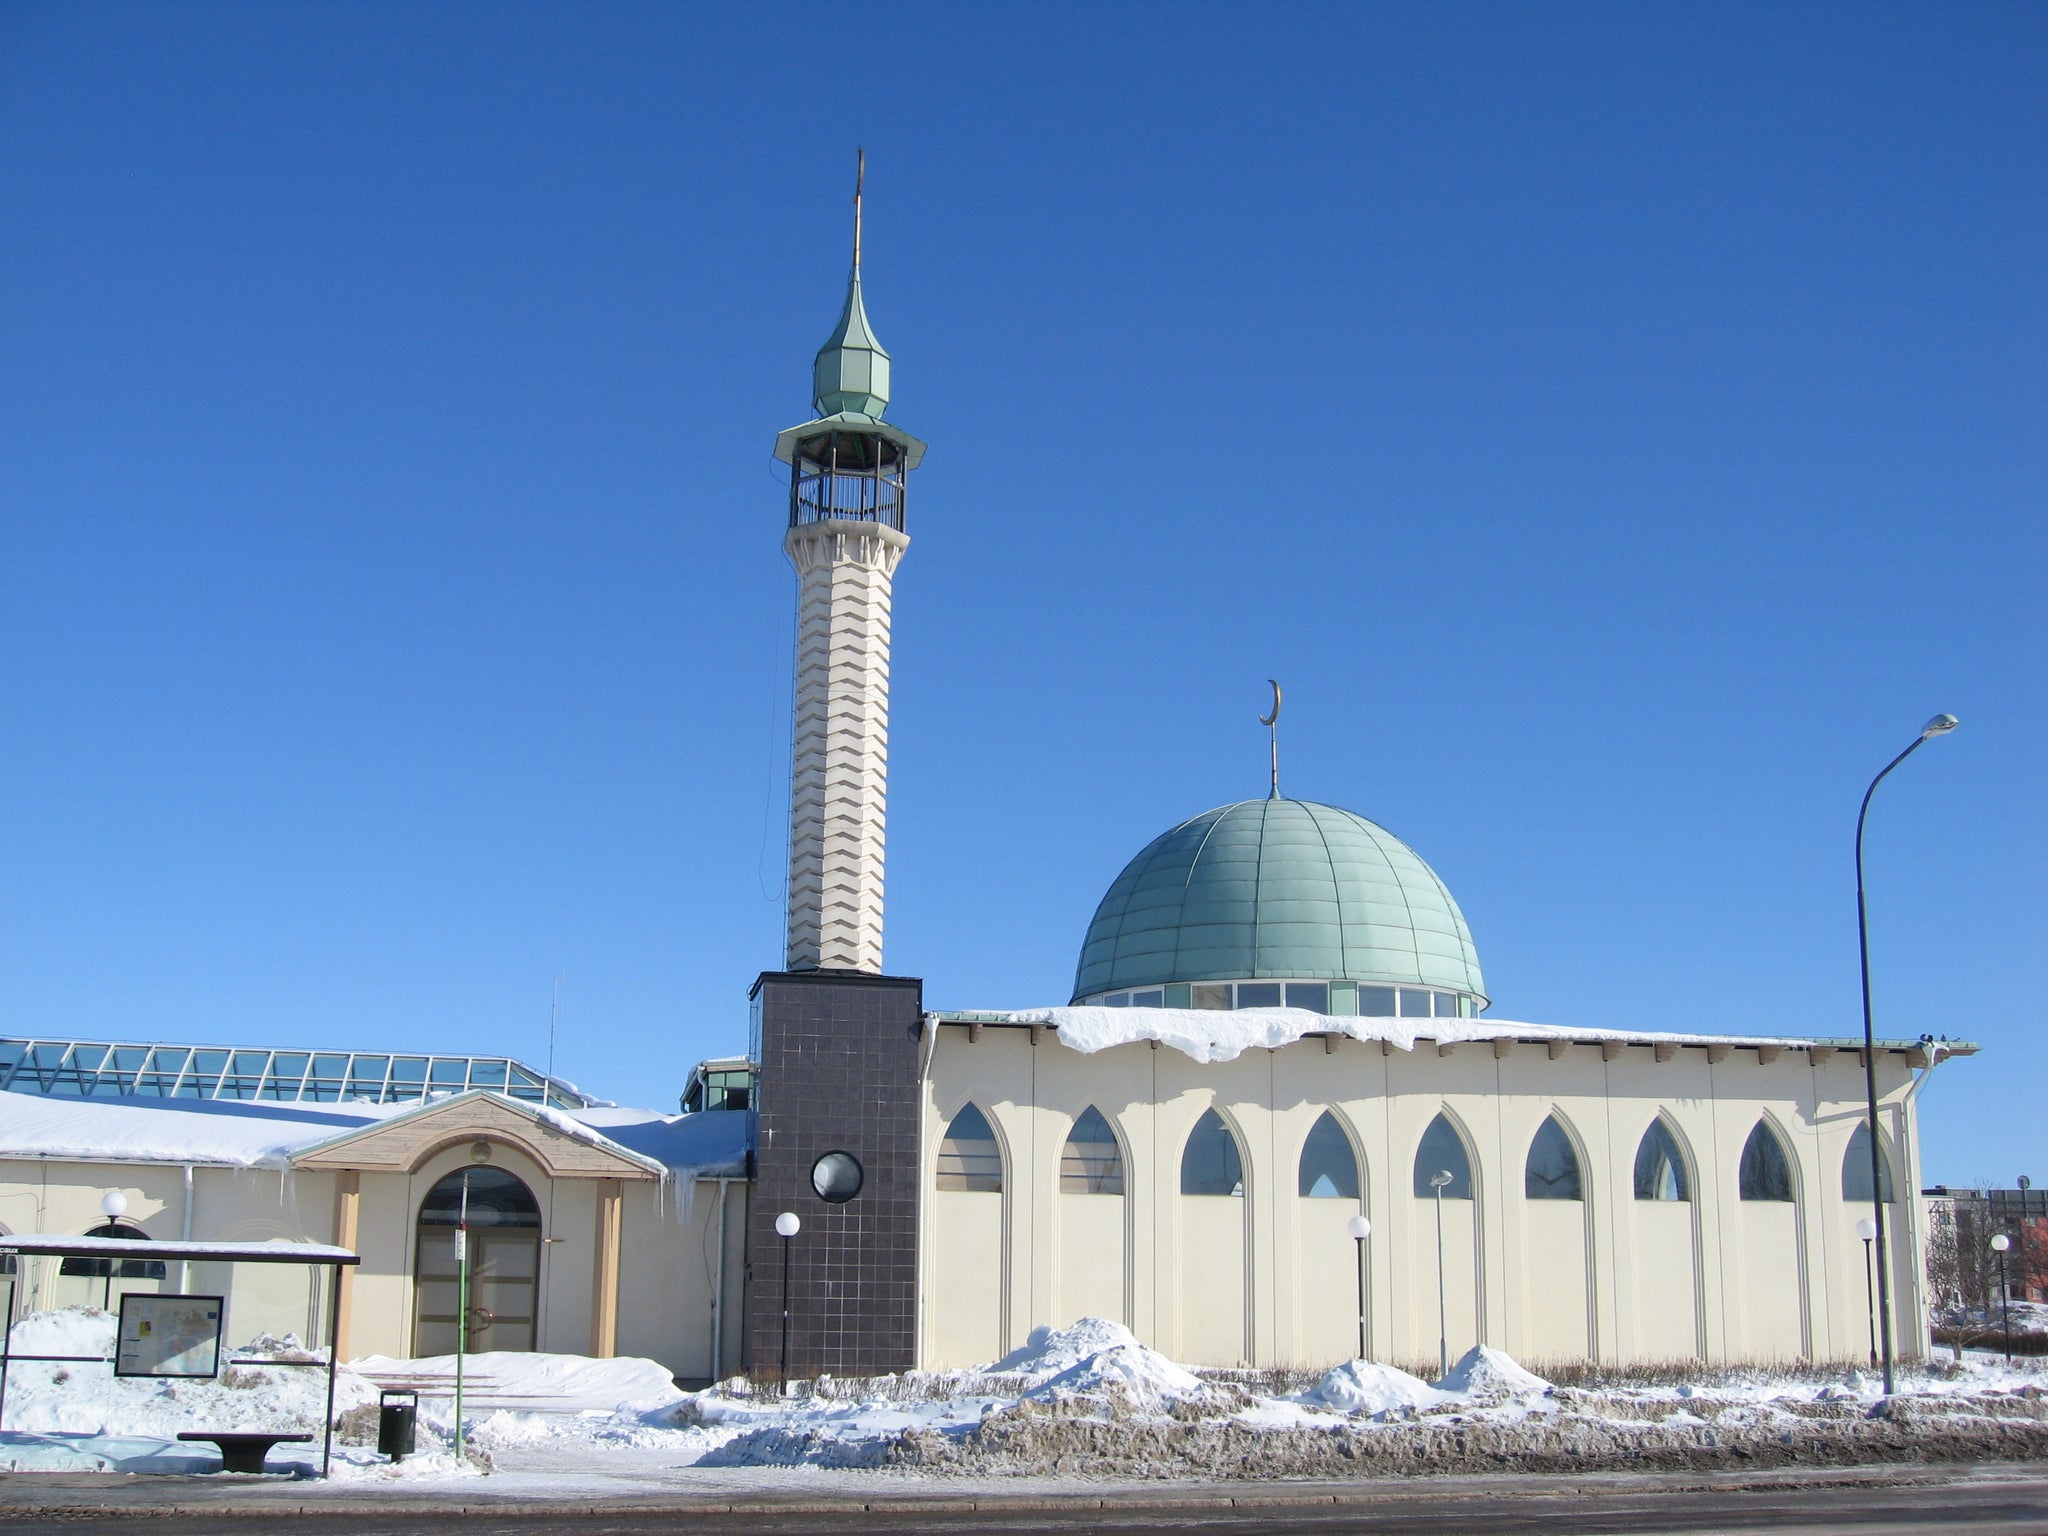 The Uppsala mosque in Sweden, where the sun will rise at around 3:30am and won't go down until around 19 hours later during Ramadan (Pic by Johan A via Flickr, published under Creative Commons Attribution 2.0 License)